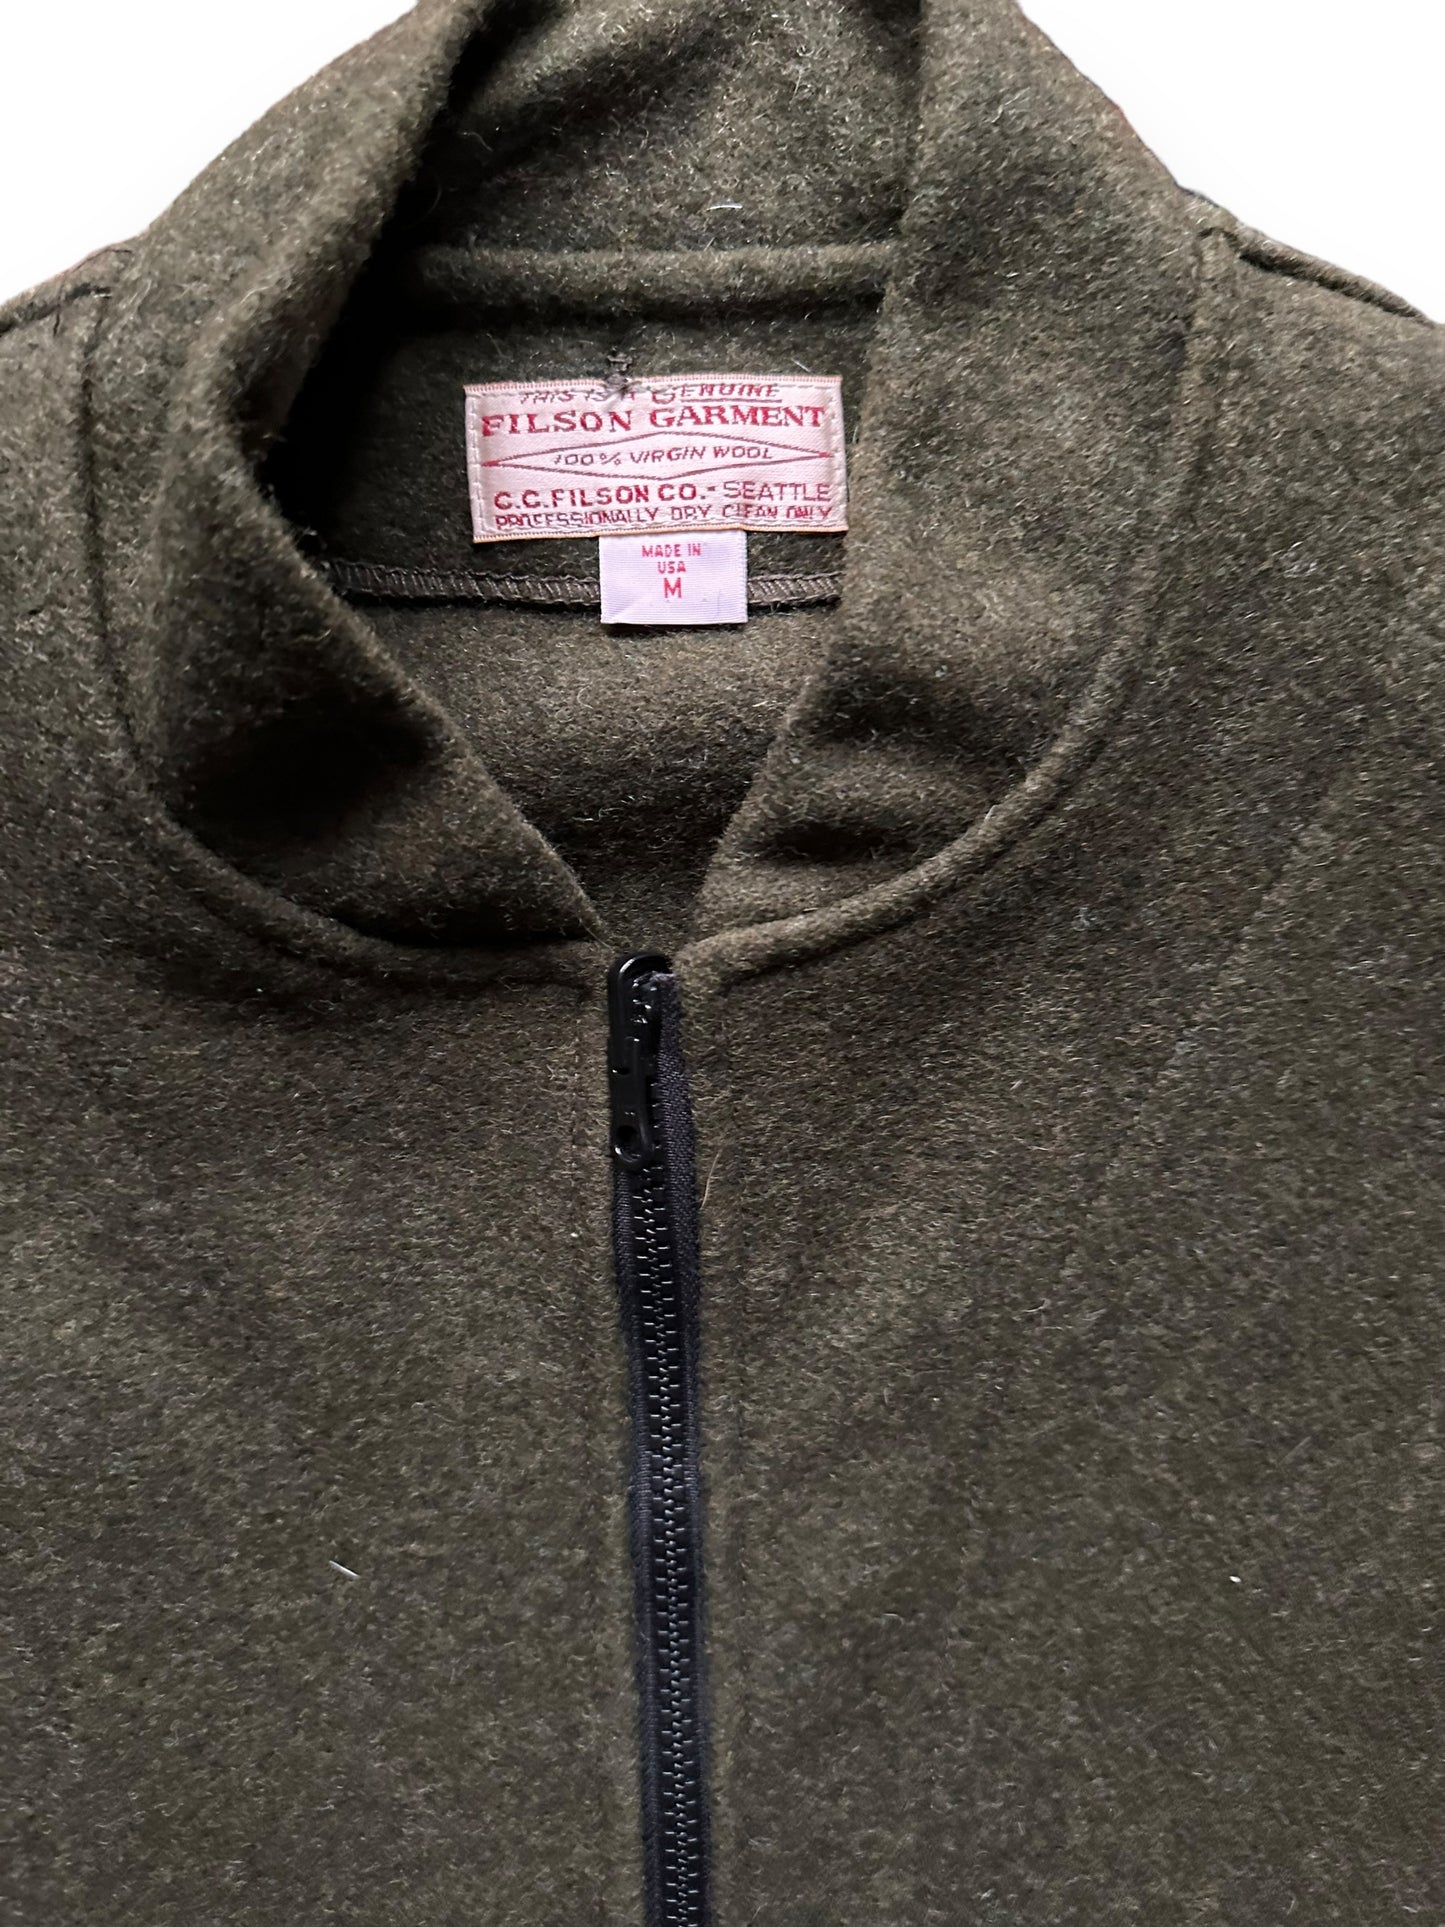 Tag View of New Old Stock Filson Forest Green Mackinaw Wool Liner SZ M |  Barn Owl Vintage Goods | Vintage Filson Workwear Seattle